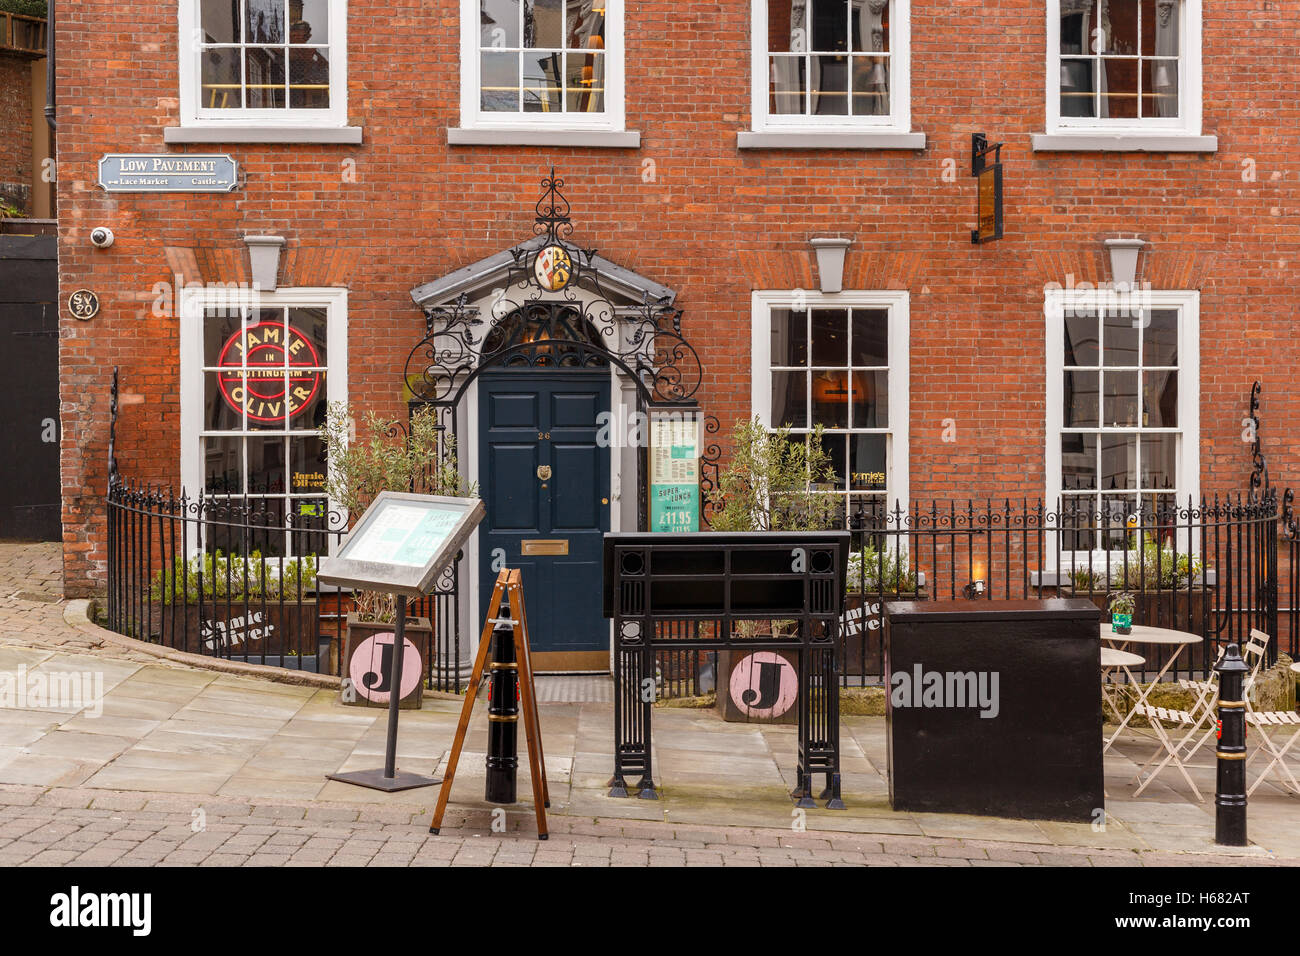 Frontage of the Jamie Oliver restaurant. In Nottingham, England. Stock Photo